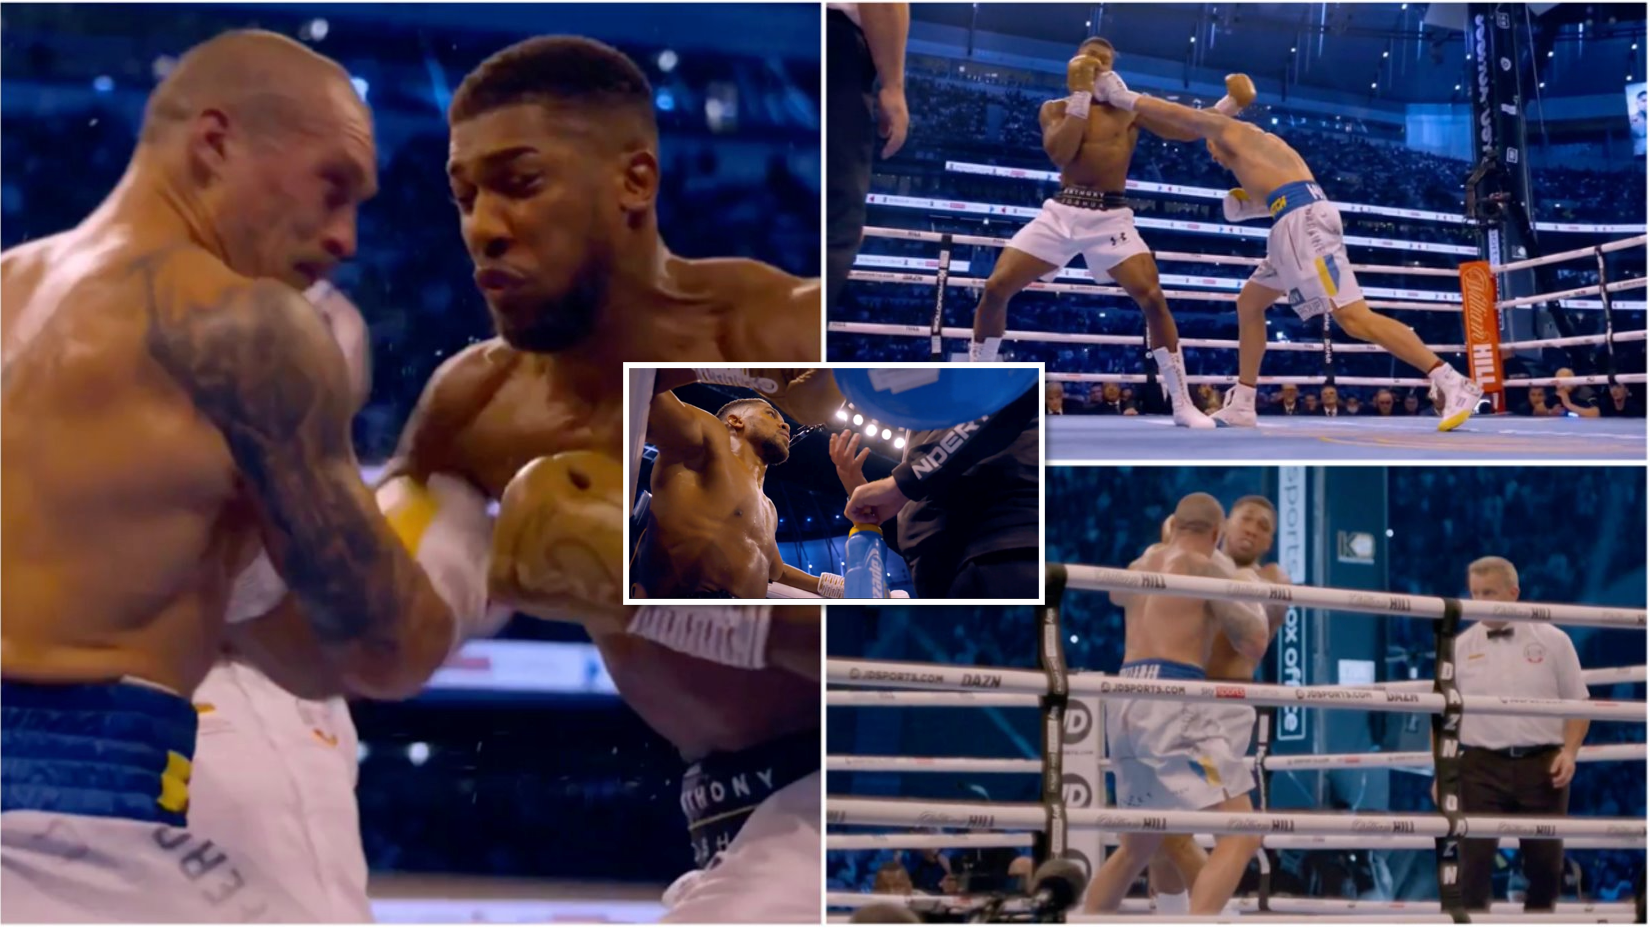 Oleksandr Usyk vs Anthony Joshua 2: New angles & highlights from first fight